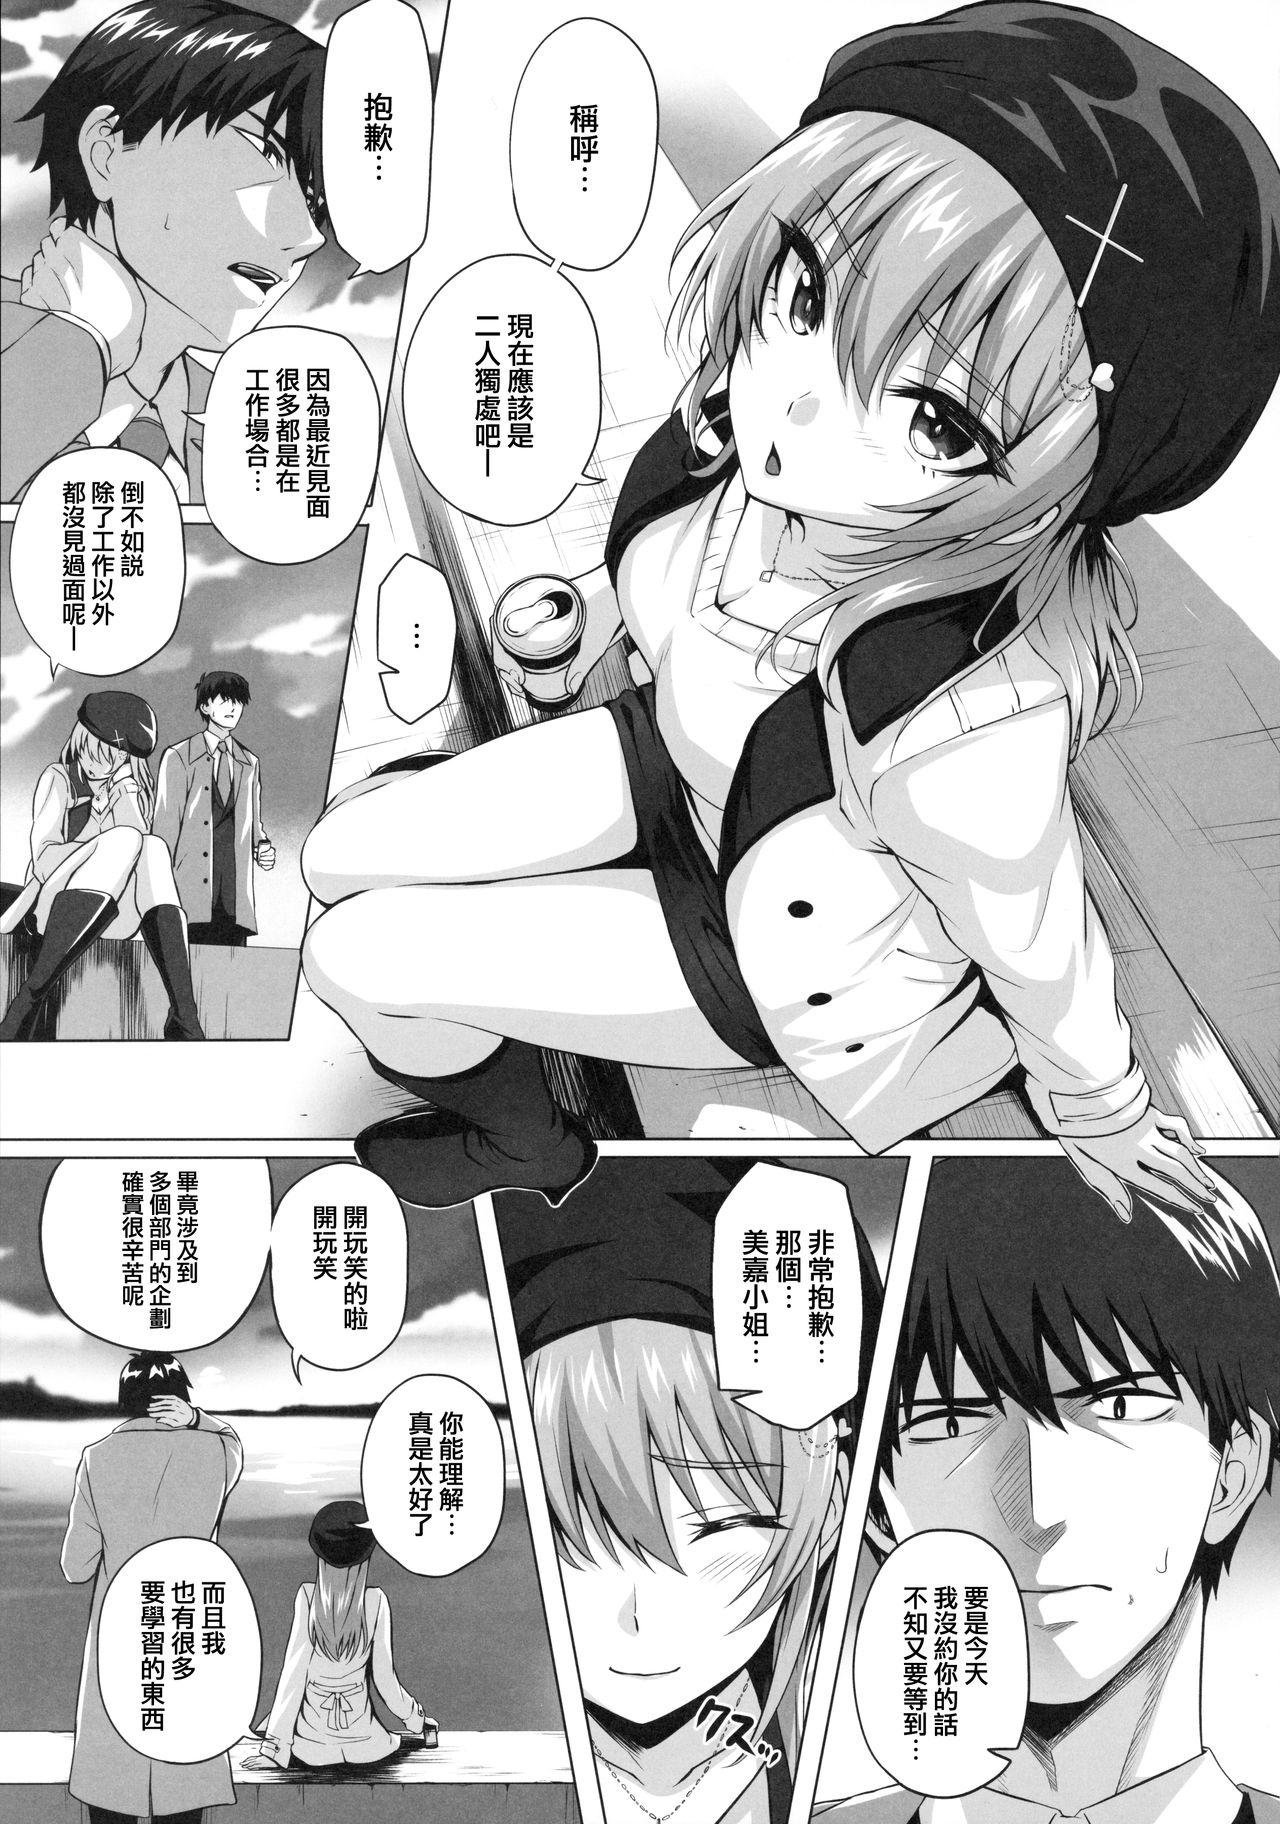 Web Mika and P Plus - The idolmaster Punished - Page 5